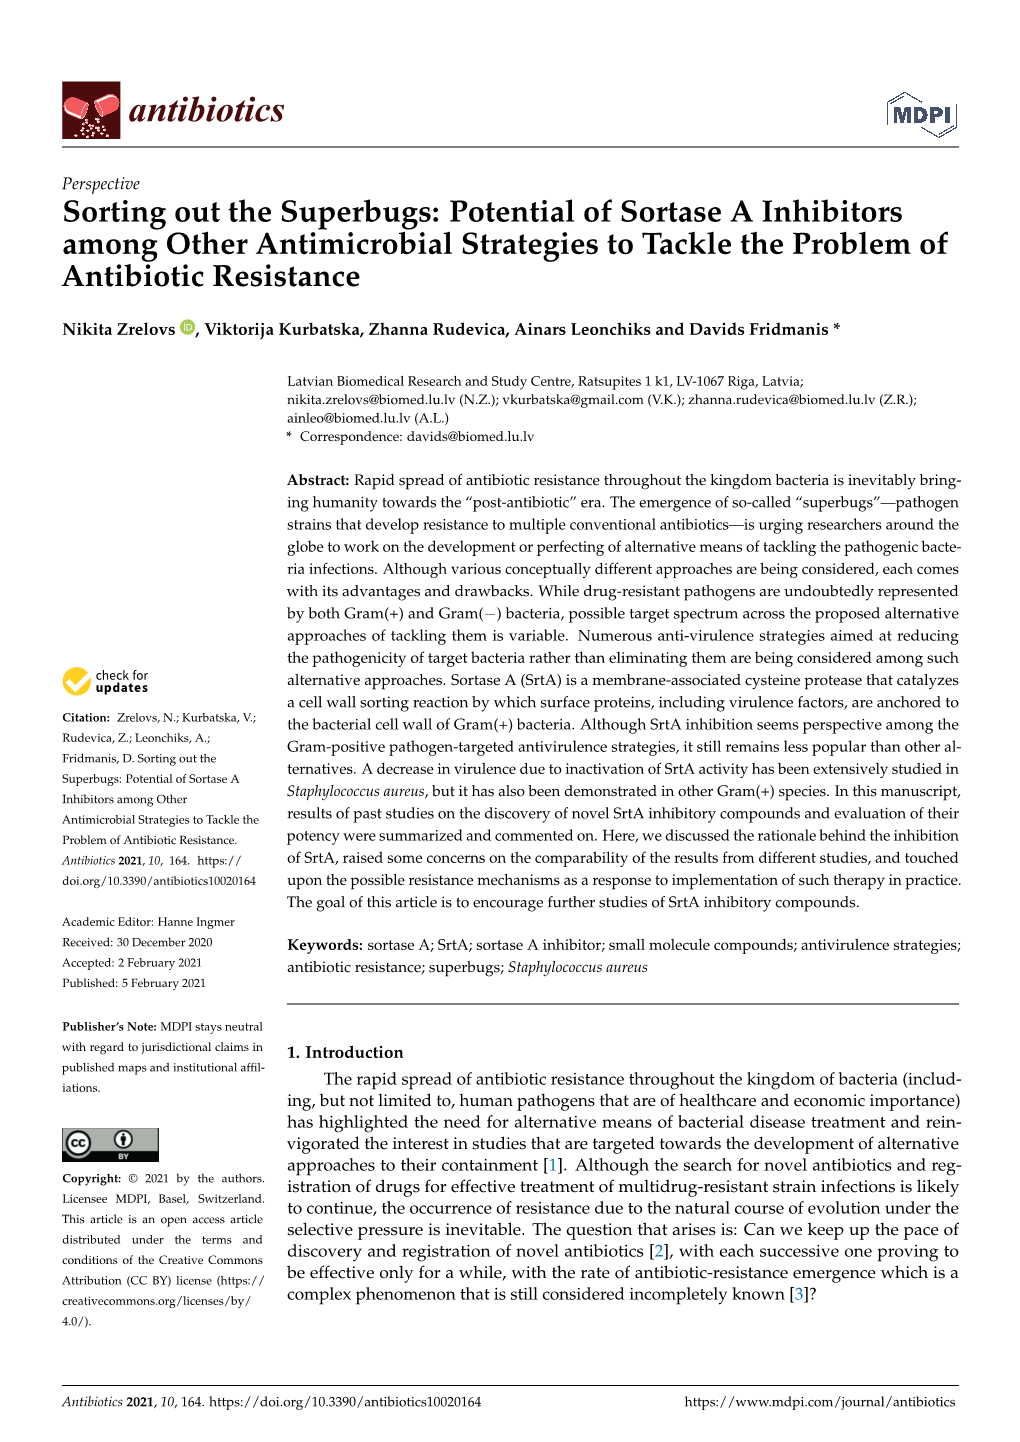 Potential of Sortase a Inhibitors Among Other Antimicrobial Strategies to Tackle the Problem of Antibiotic Resistance